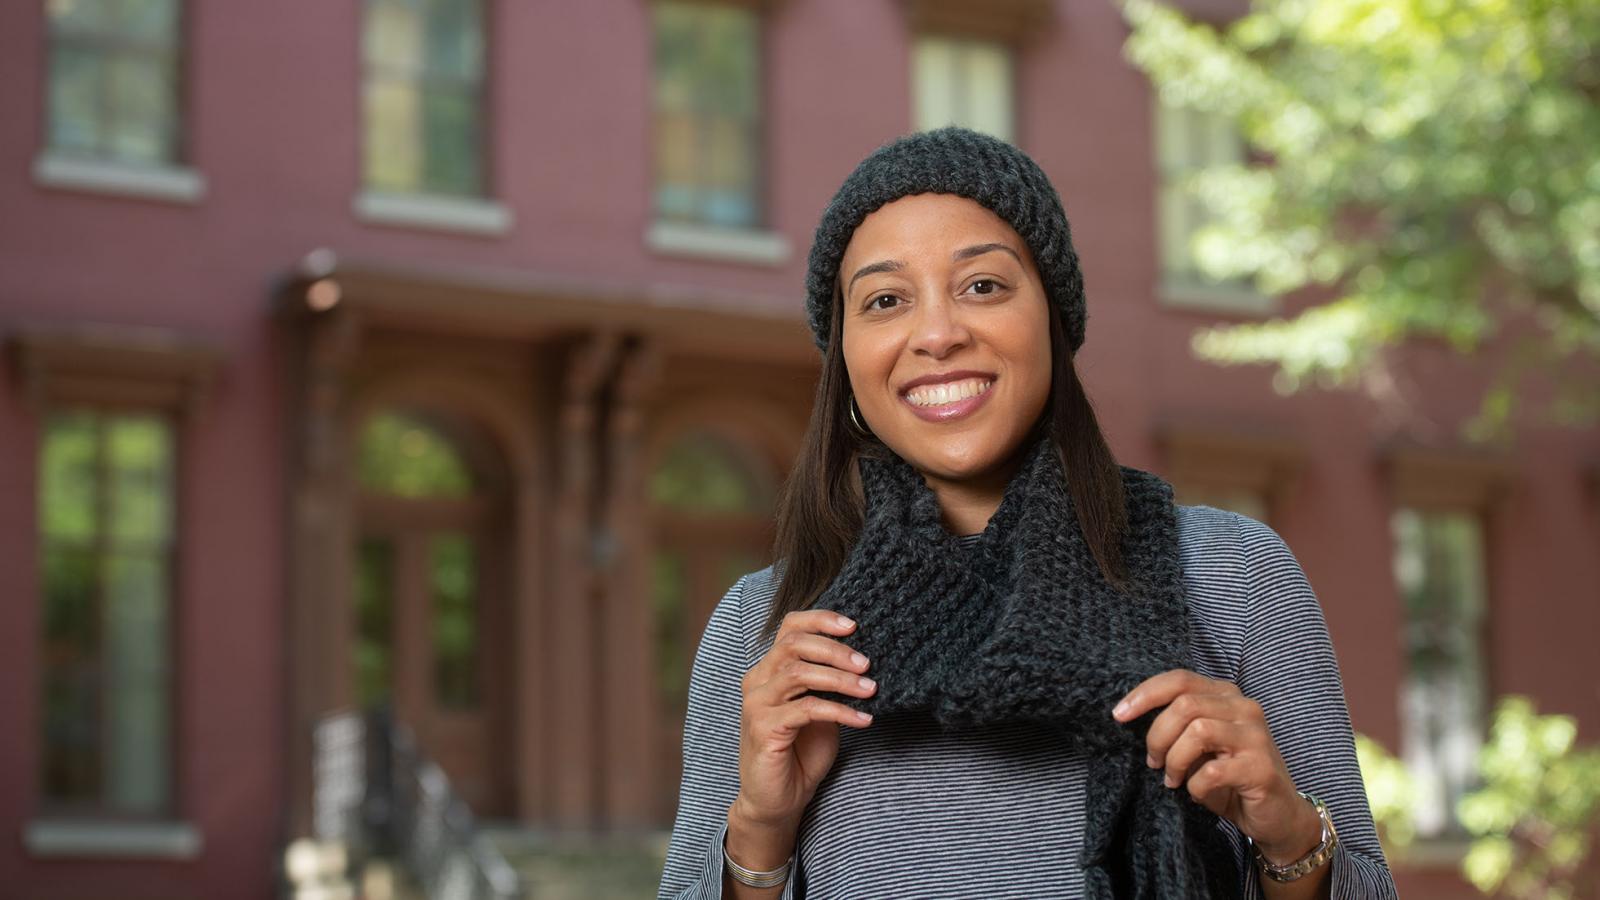 Dr. Denée Moore provides prenatal care and enjoys knitting hats and scarves as welcome gifts for her newborn patients. Photo: Allen Jones, VCU University Relations